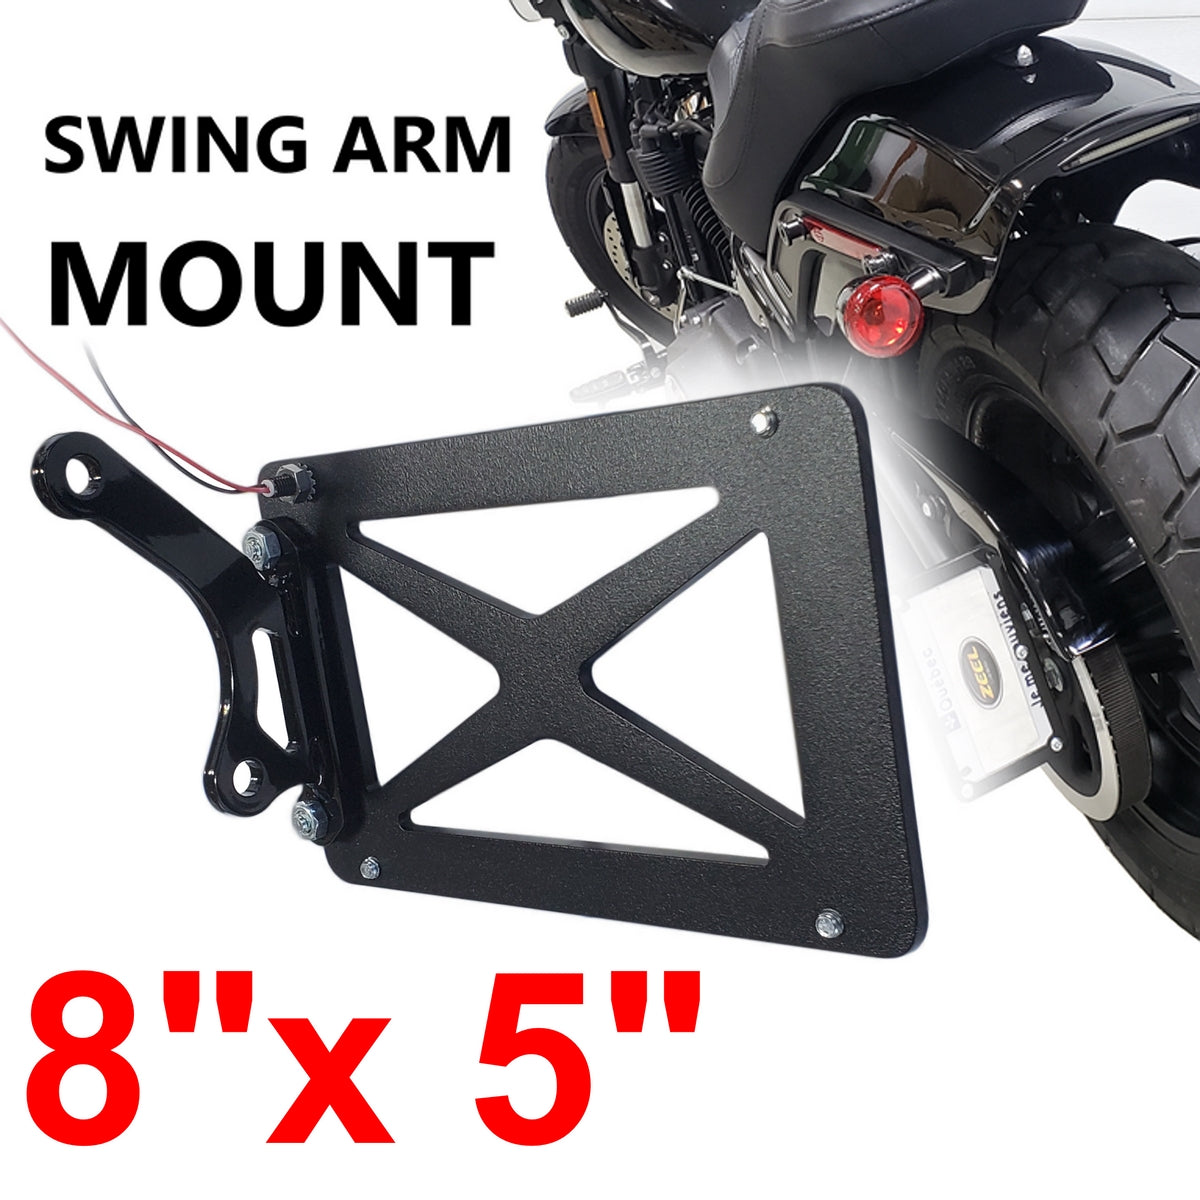 Side mounted license plate for Dyna bikes